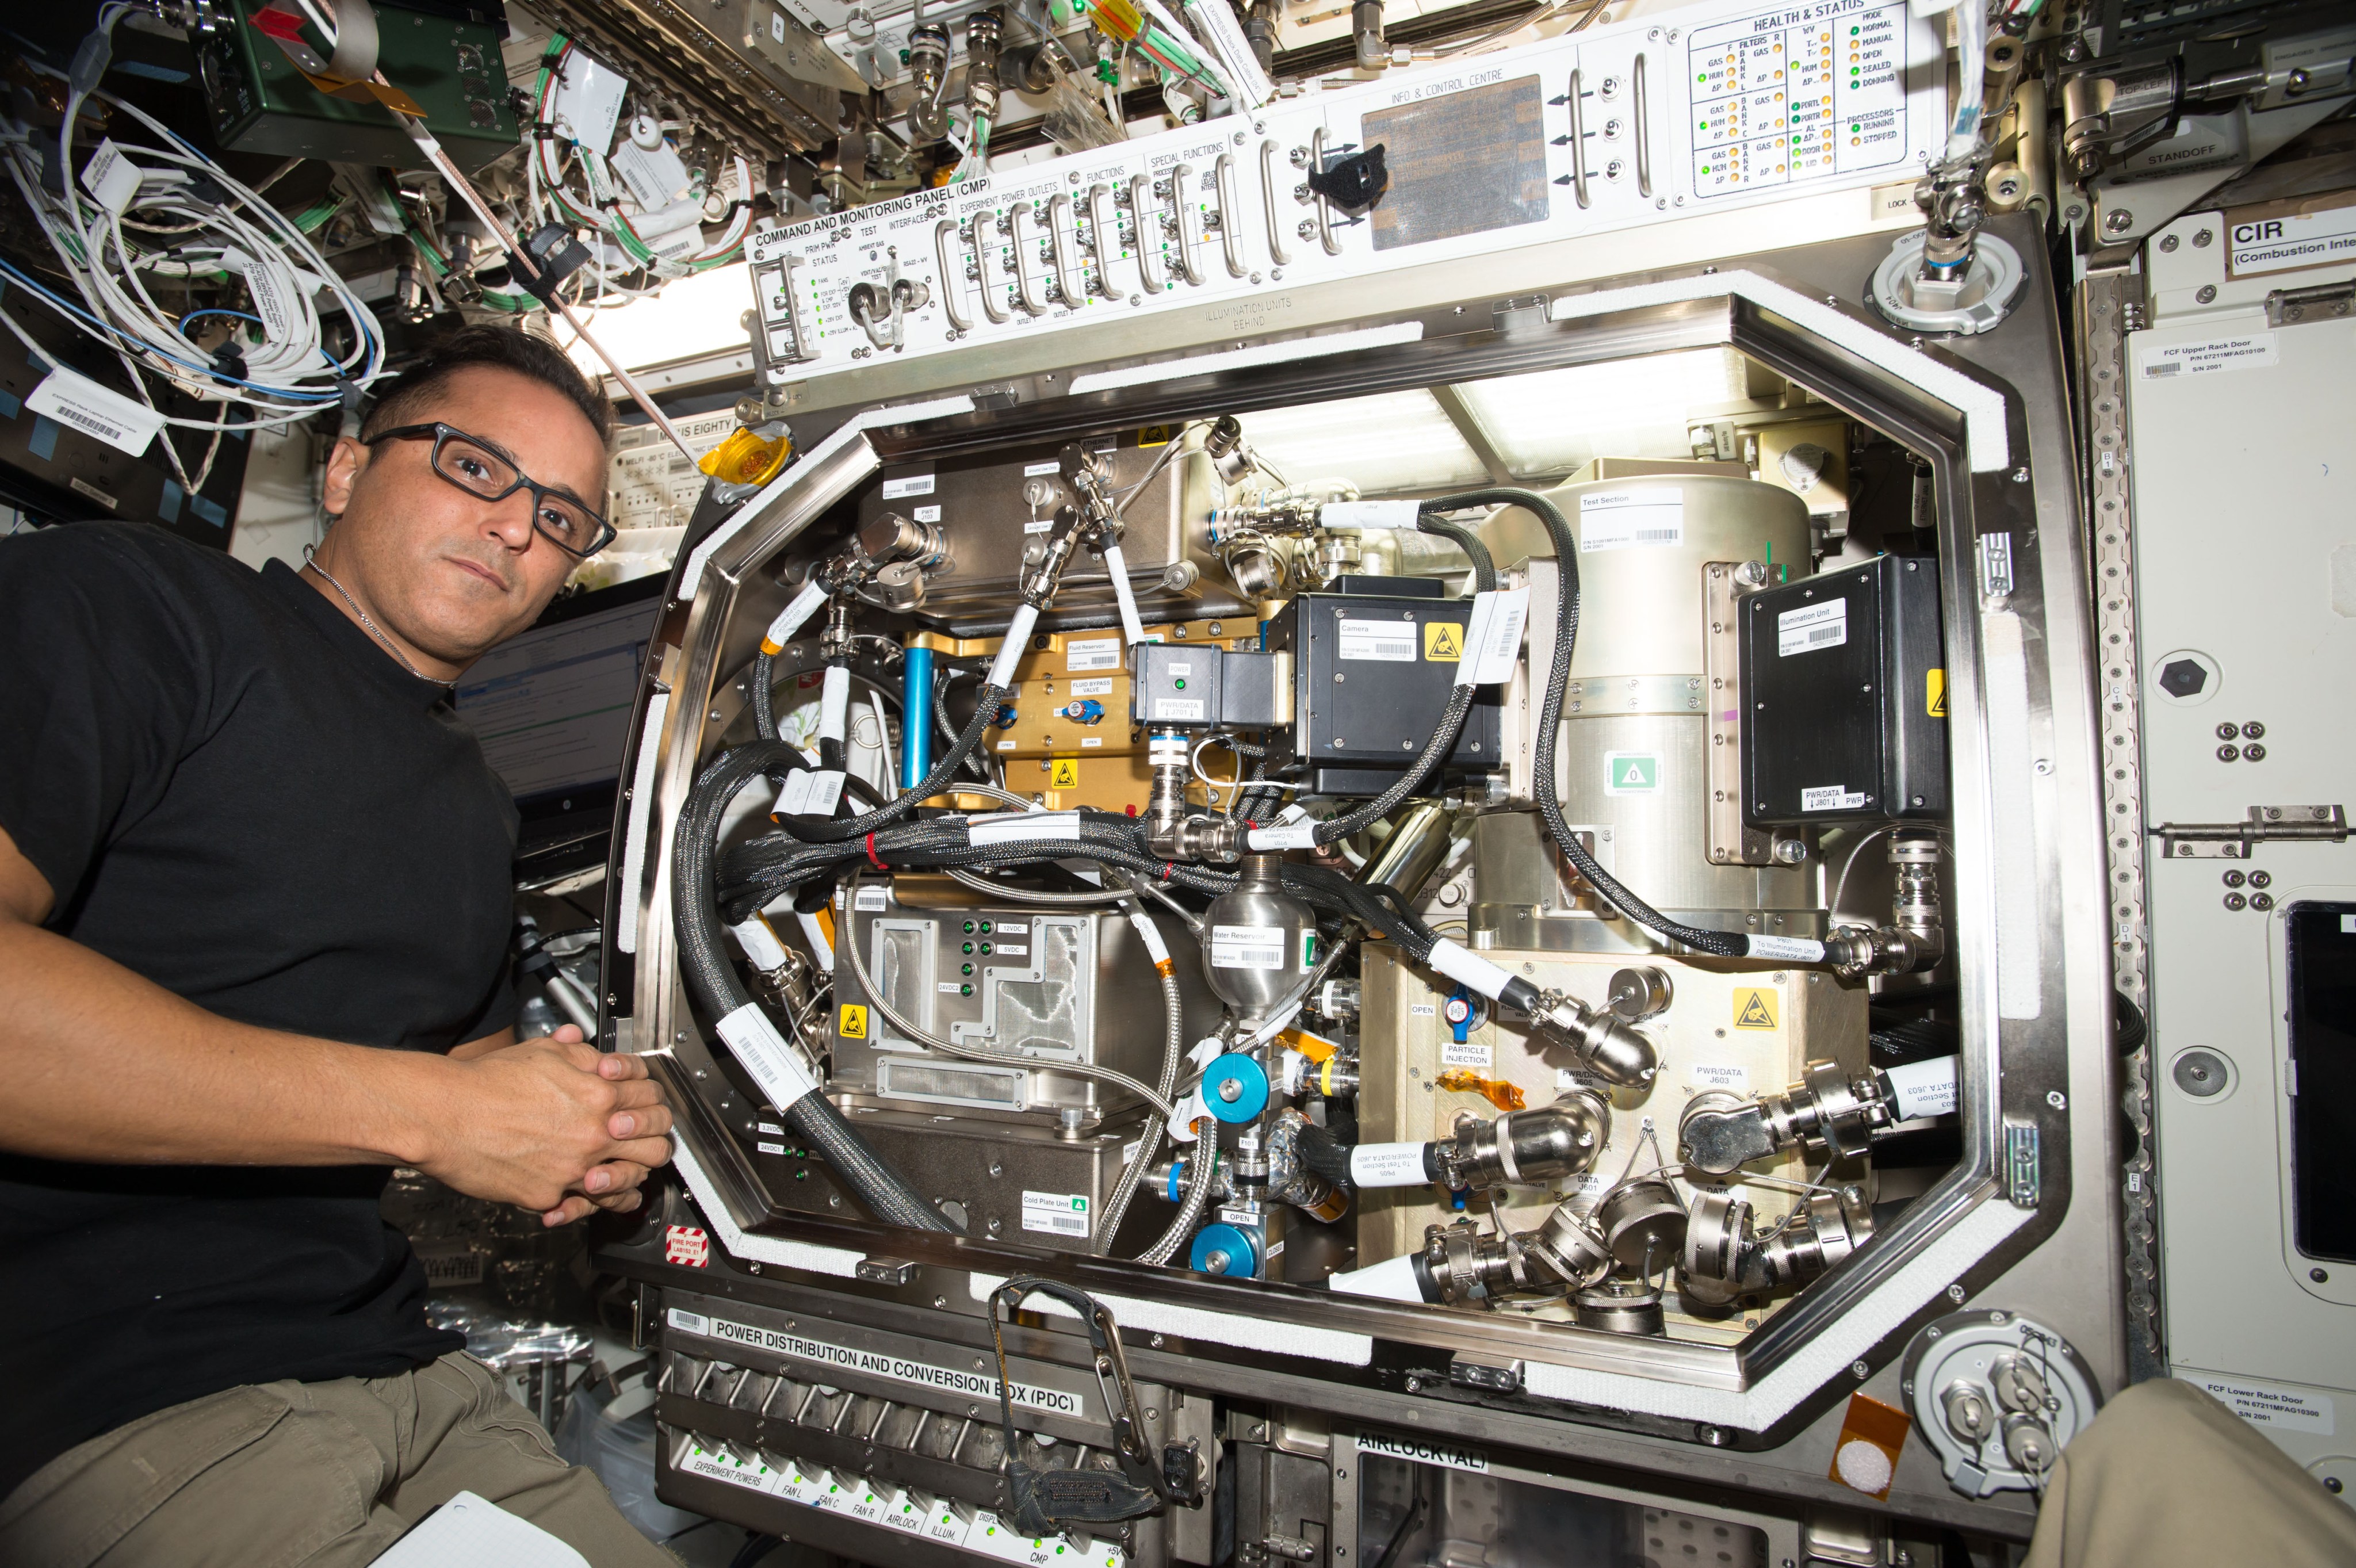 Astronaut Joseph Acaba wearing glasses and a black T-shirt is half standing, suspended in microgravity next to the ZBOT experiment in the Microgravity Science Glovebox (MSG) Unit aboard the station. The MSG is a rectangular compartment tightly fitted with various components including the test tank, enclosed in a cylindrical metallic vacuum jacket, sitting on top of a close Fluid Supply Unit (FSU) that is used for fluid thermal conditioning. The space in MSG is further crowded by a reservoir, various entangled hoses and wiring system, a camera and a small laser unit used for Particle Imaging Velocimetry (PIV) diagnostics that measures and visualizes fluid motion in the tank.